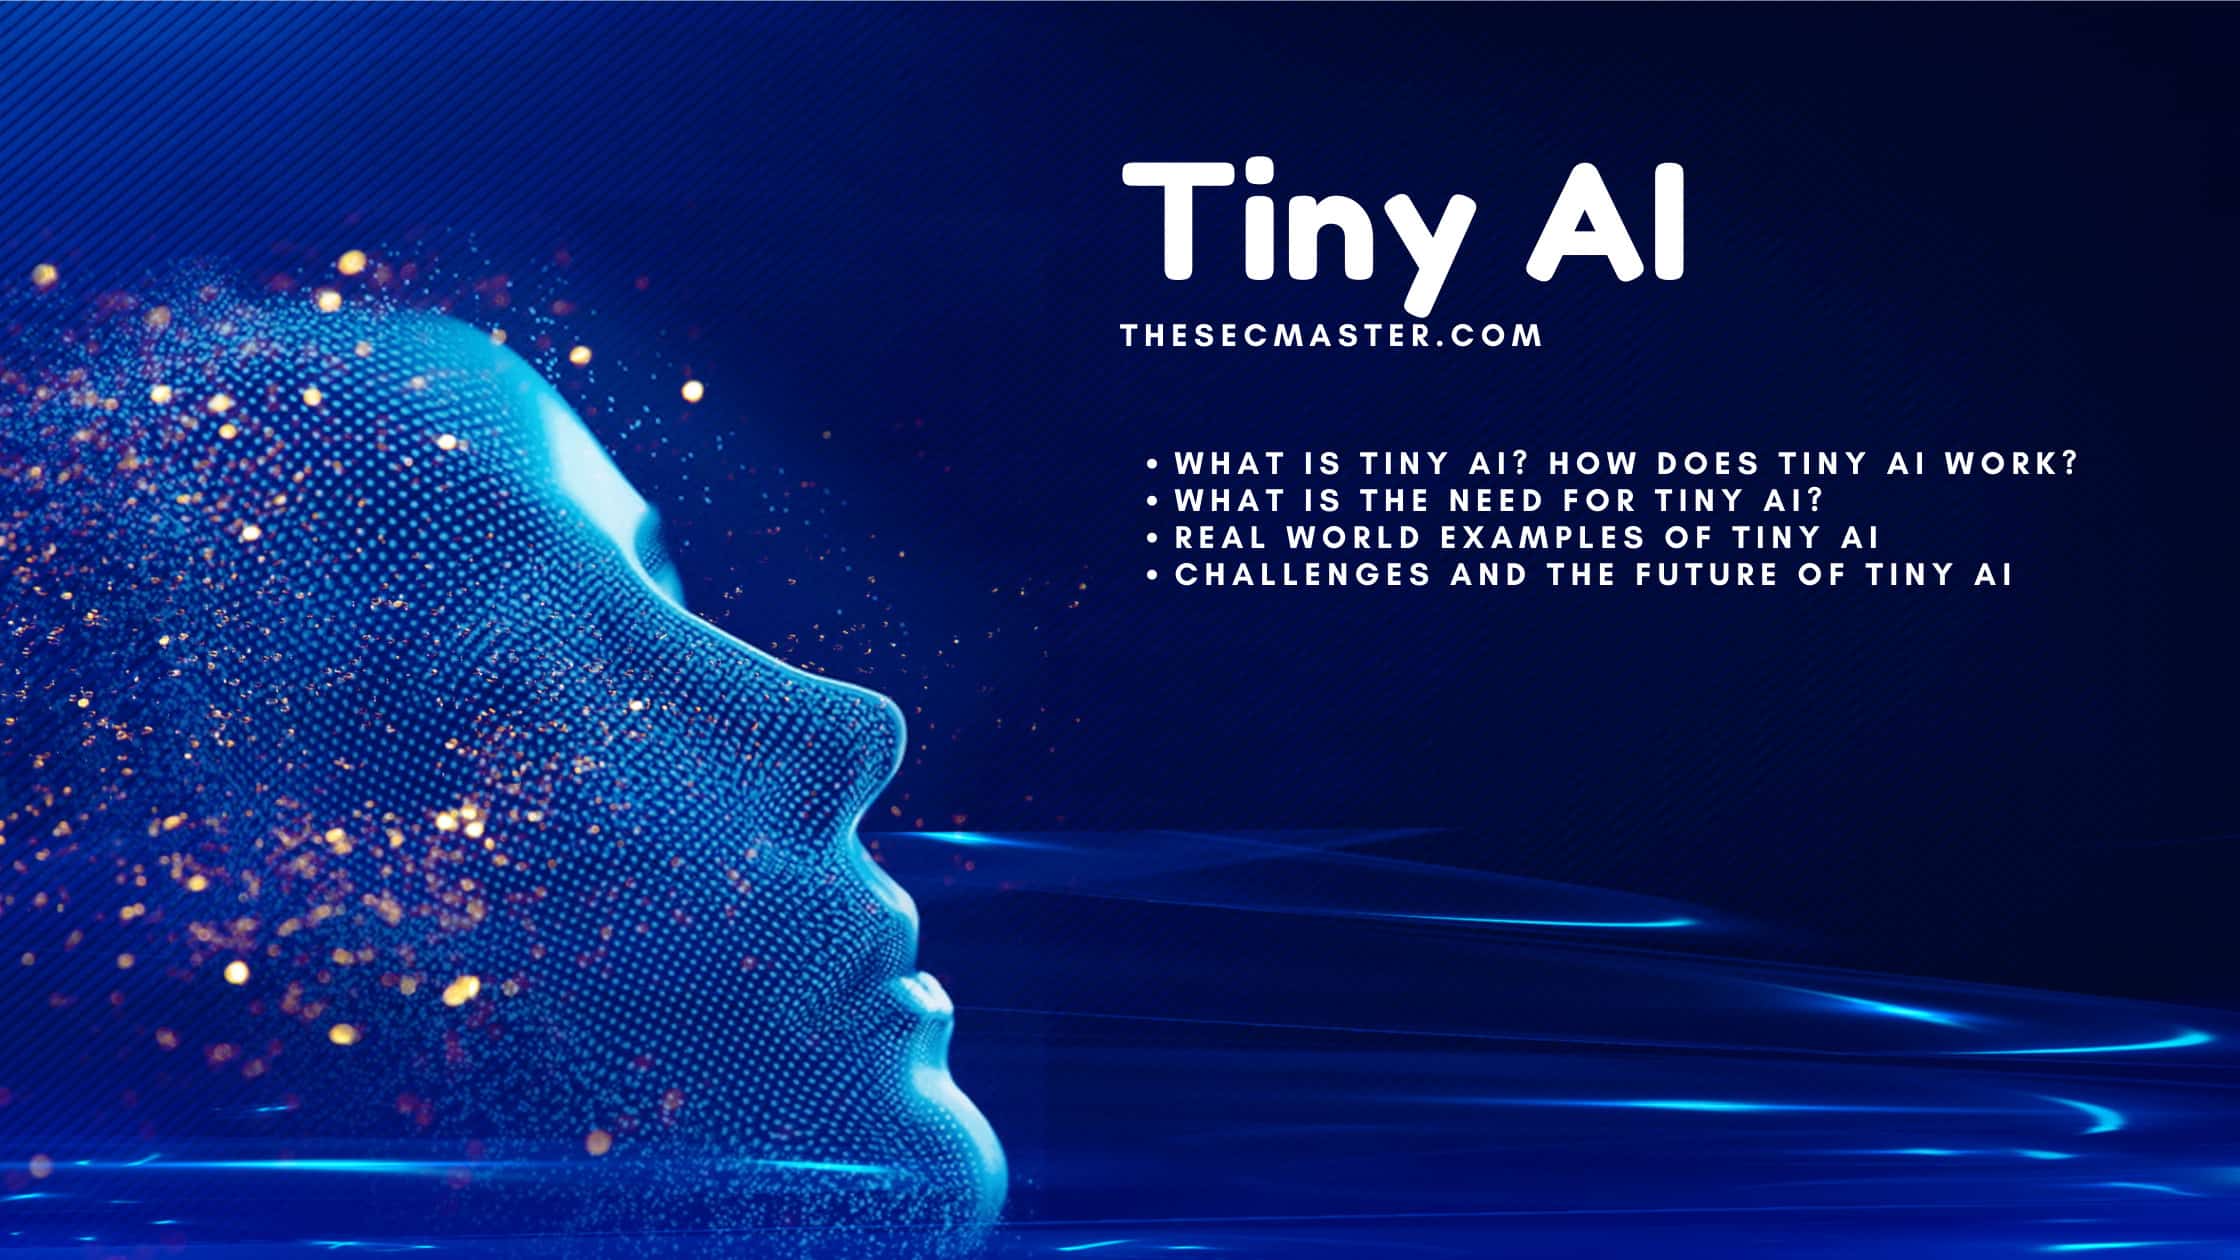 How Does Tiny Ai Work What Is The Need For Tiny Ai Challenges With Real World Examples Of Tiny Ai